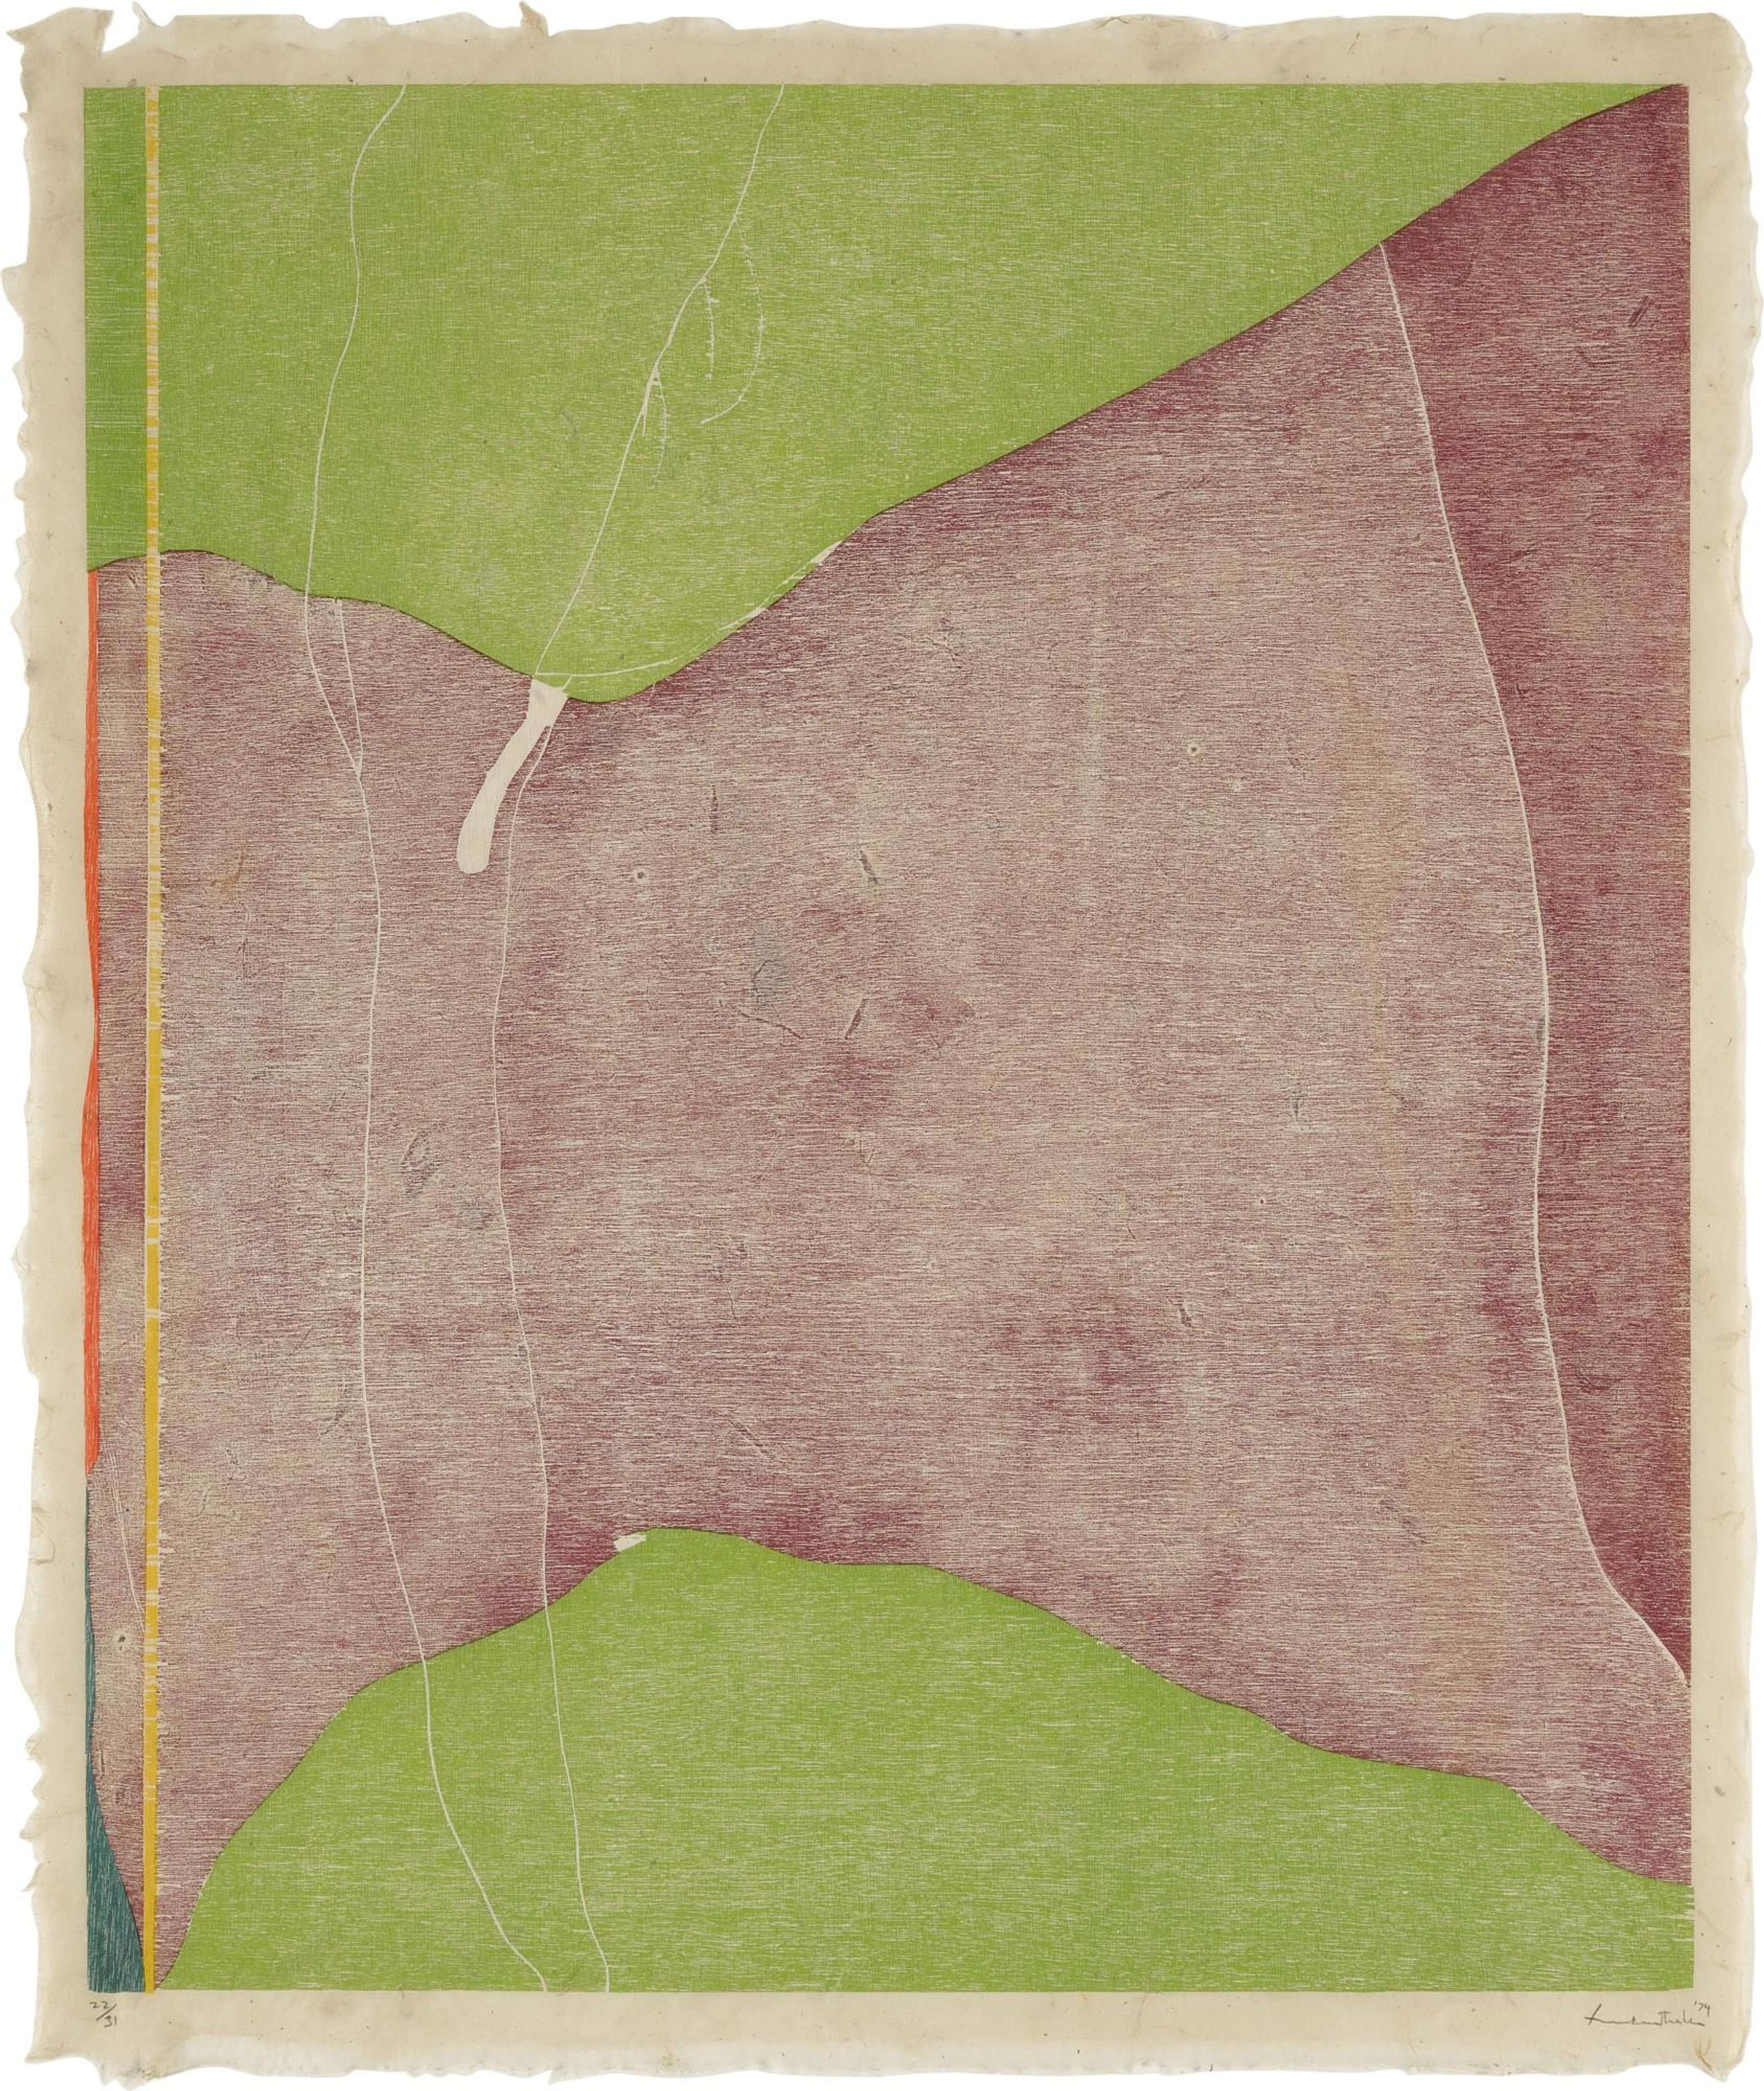 Helen Frankenthaler’s Savage Breeze. An abstract expressionist woodcut print of a landscape of green grass and muted red in between.